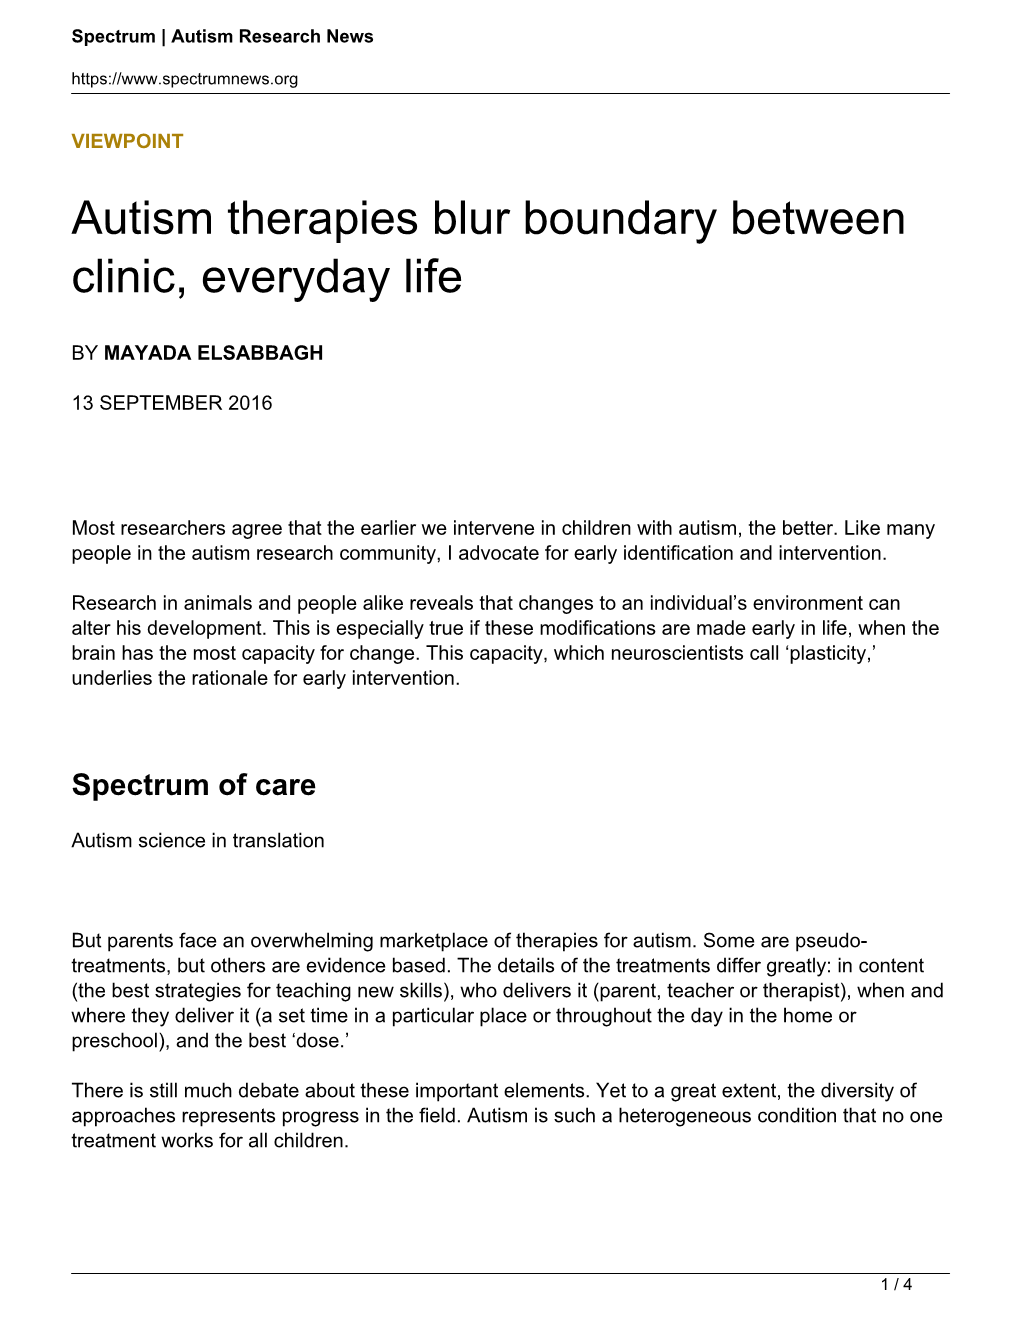 Autism Therapies Blur Boundary Between Clinic, Everyday Life